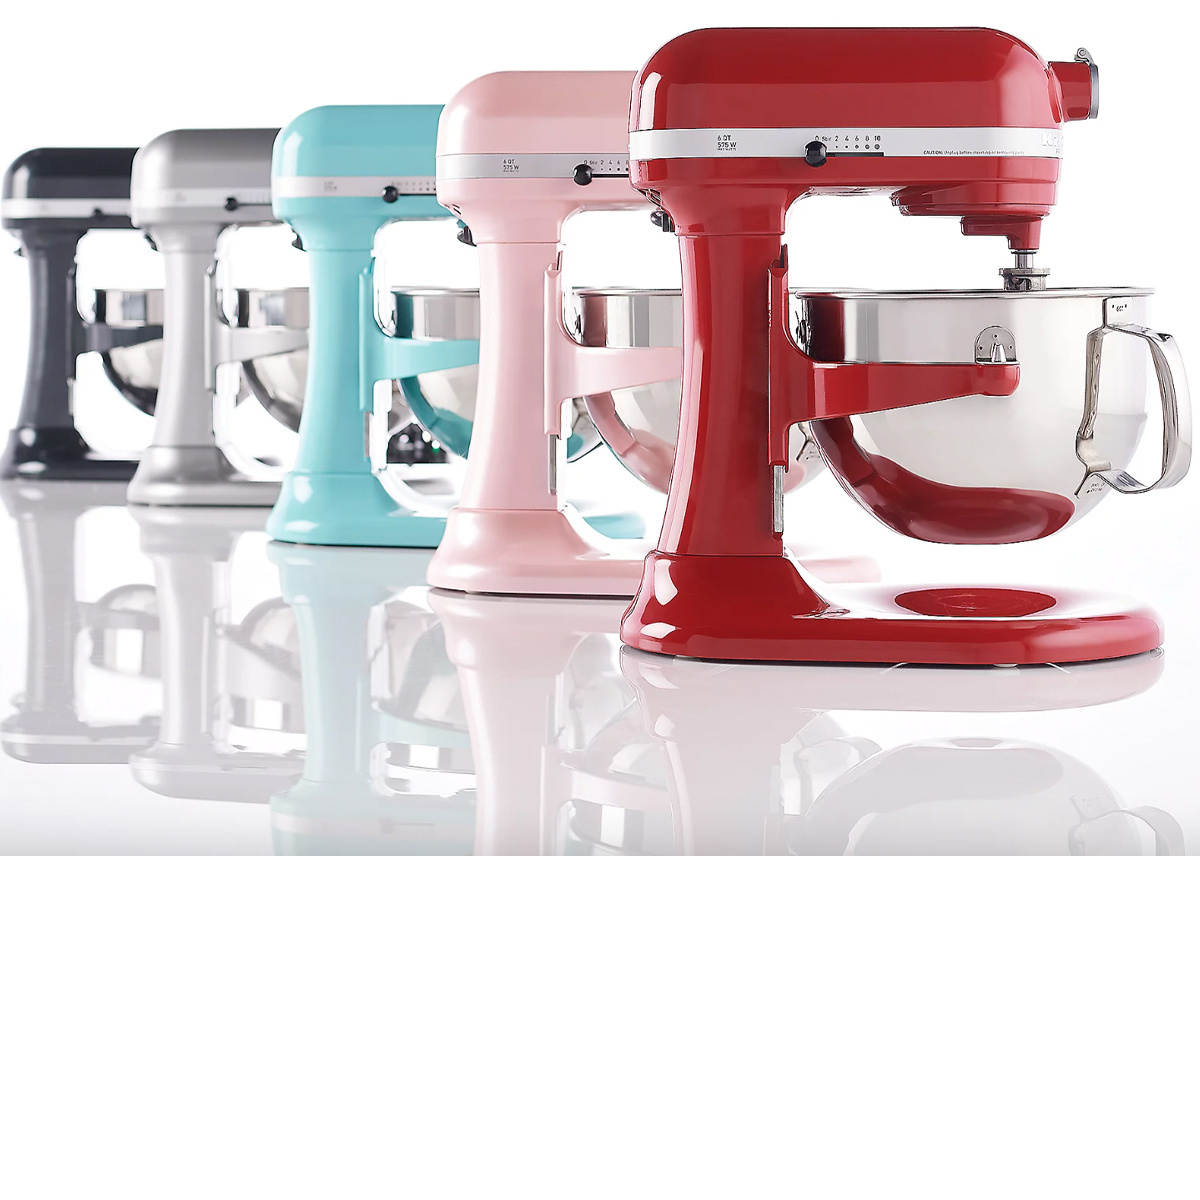 KitchenAid's space-saving Artisan stand mixer is $120 off during Prime  Early Access